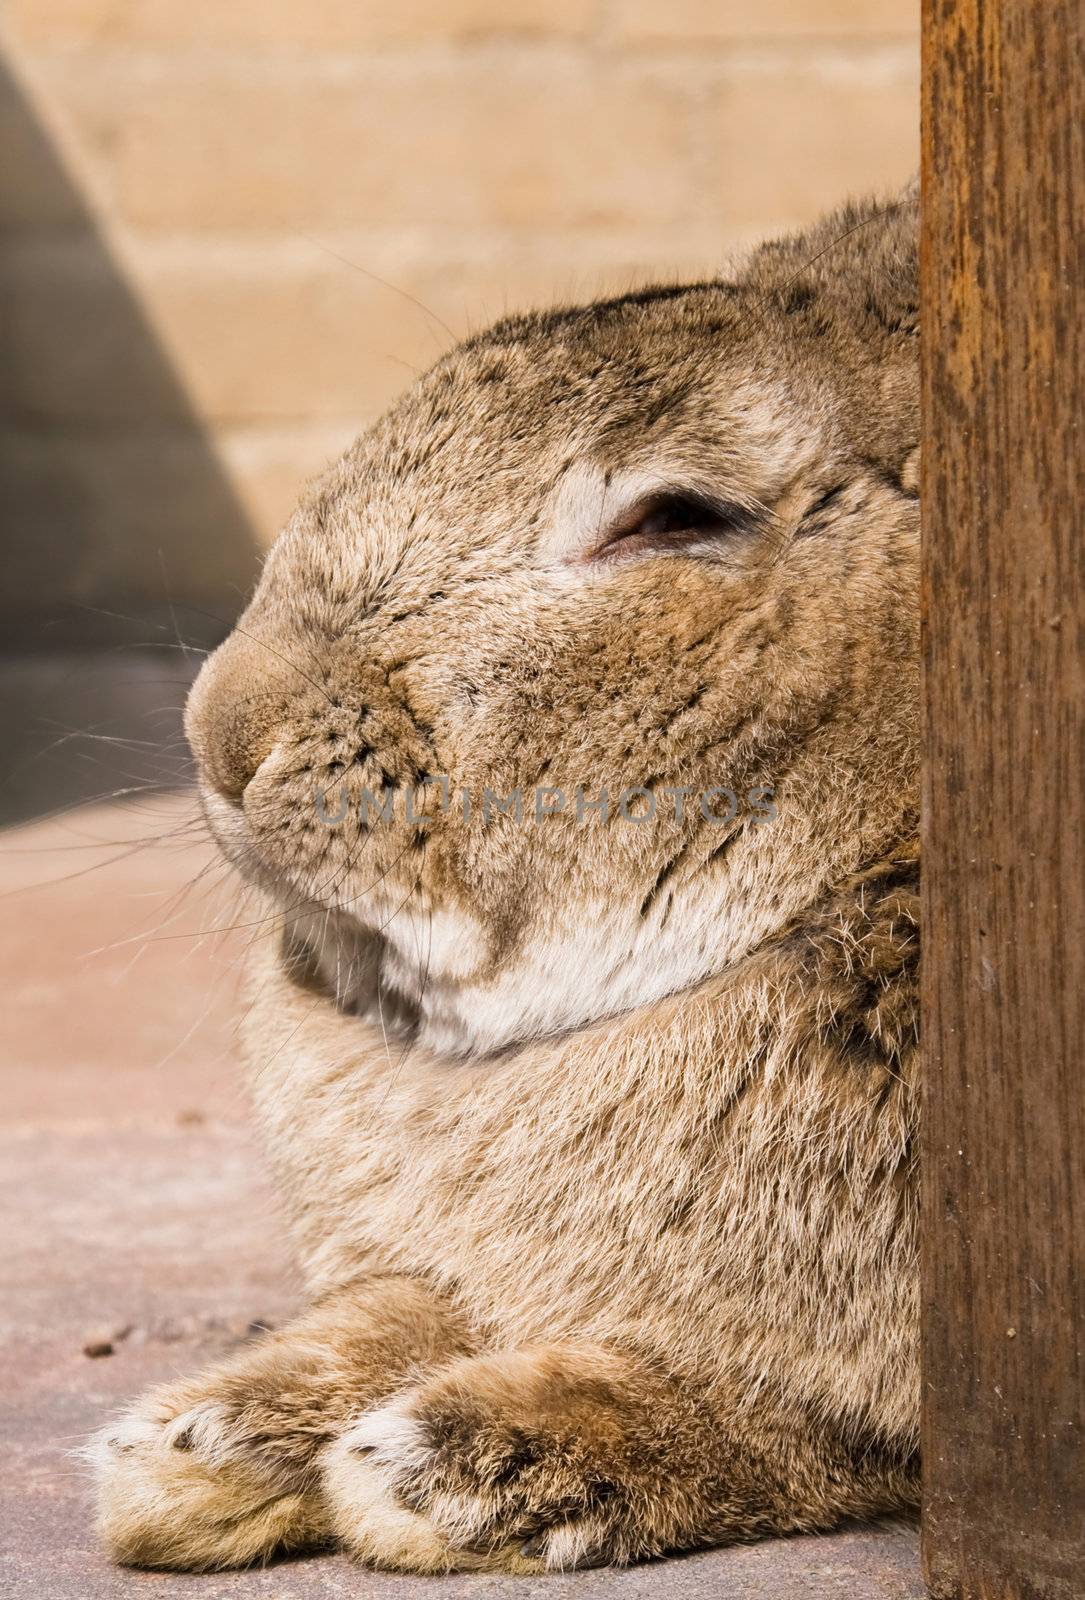 close up of a rabbit in resting mode
